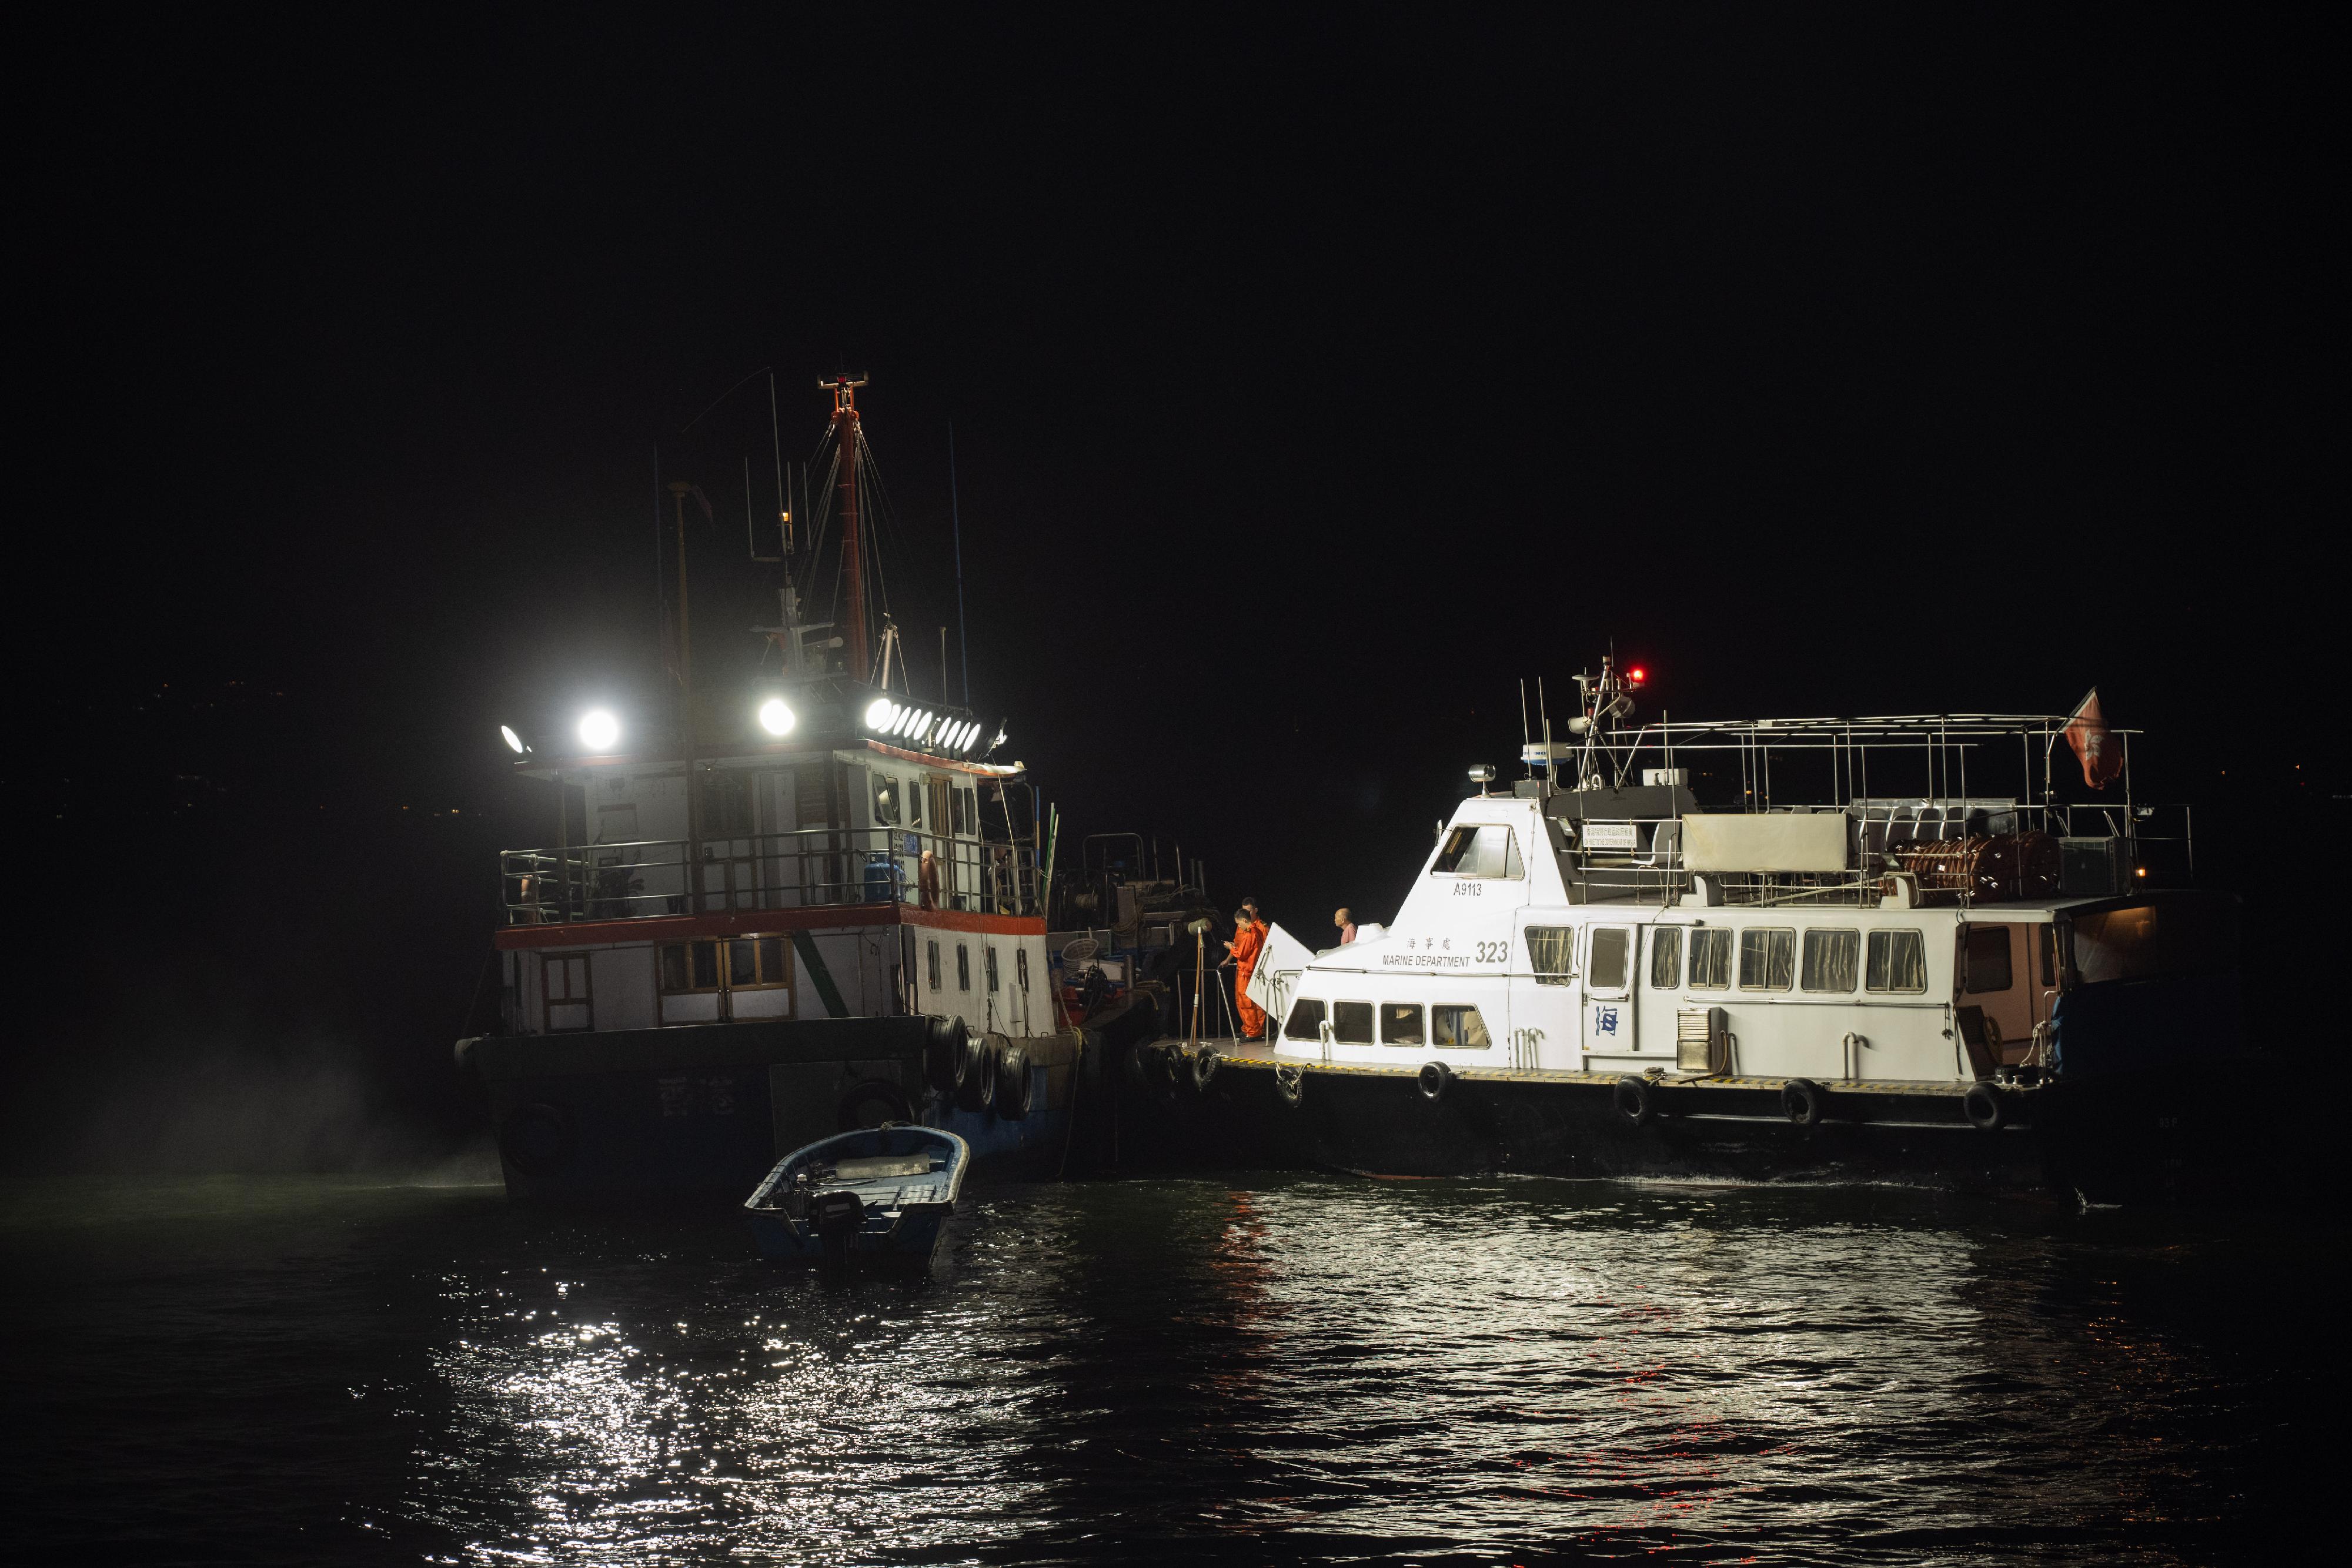 The Marine Department (MD) together with the Hong Kong Police Force and the Agriculture, Fisheries and Conservation Department conducted a joint operation against the improper use of bright light for fishing and illegal fishing activities in the southern waters of Hong Kong last night (August 10). Photo shows MD officers about to inspect a fishing vessel.